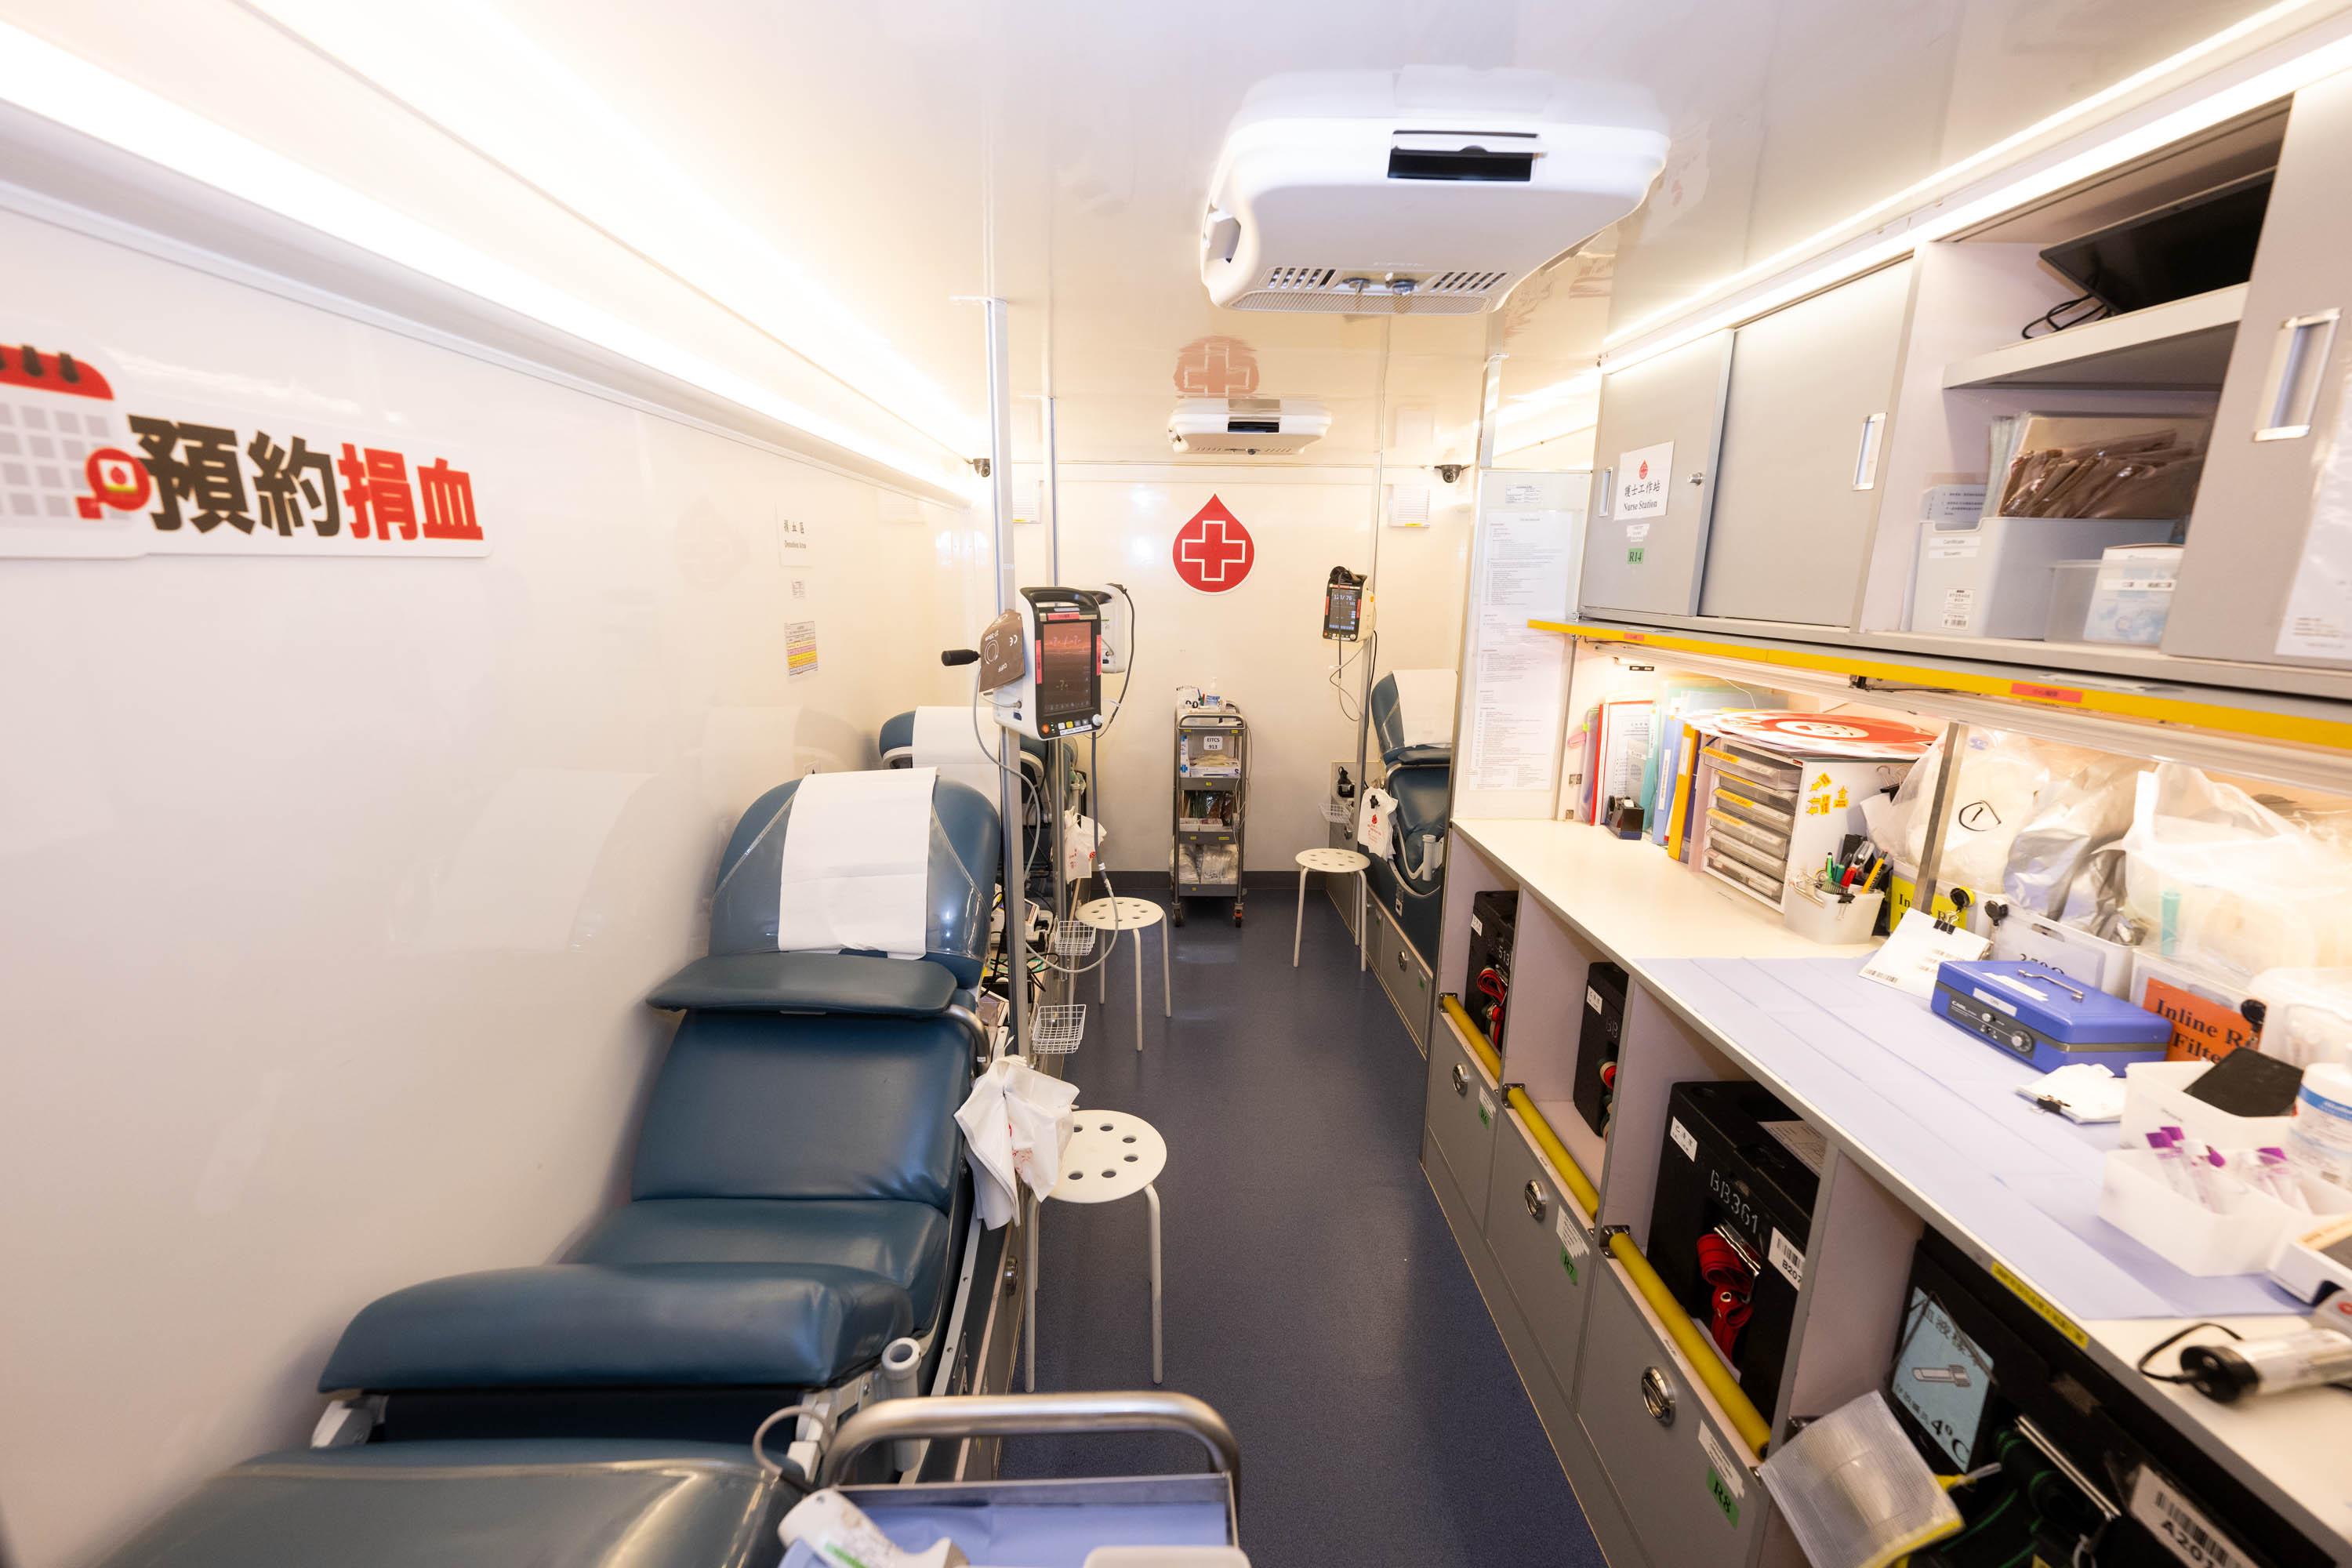 The Legislative Council (LegCo) Blood Donation Day was successfully held for two consecutive days (December 13 and 14) in the LegCo Complex. Photo shows that the mobile blood donation vehicle of the Hong Kong Red Cross Blood Transfusion Service is parked at the LegCo Complex to facilitate blood donation.